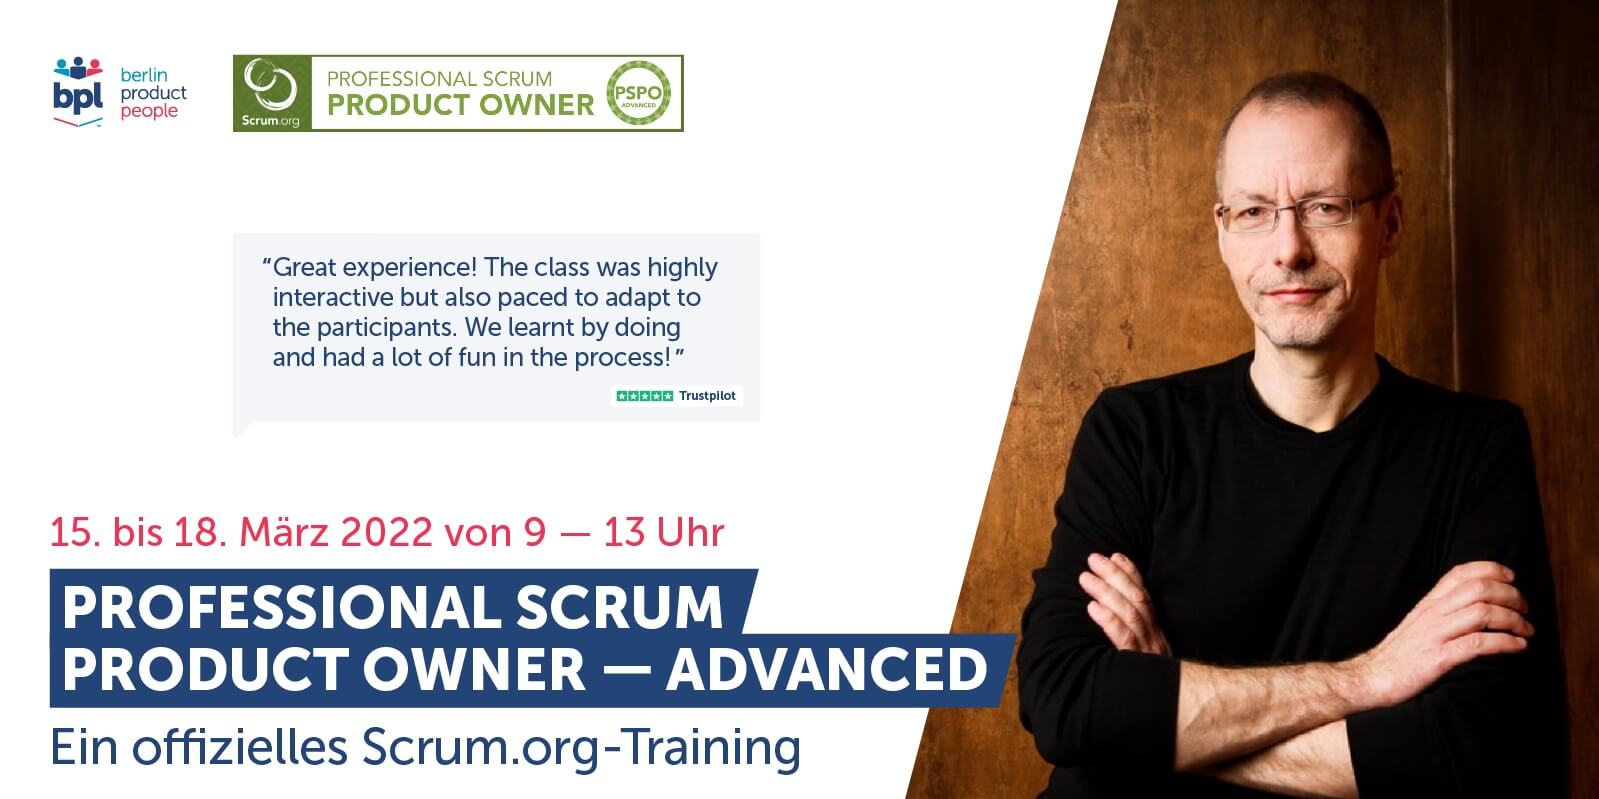 Fortgeschrittenen Professional Scrum Product Owner Advanced PSPO-A Schulung mit PSPO II Zertifikat März 2022 — Berlin Product People GmbH